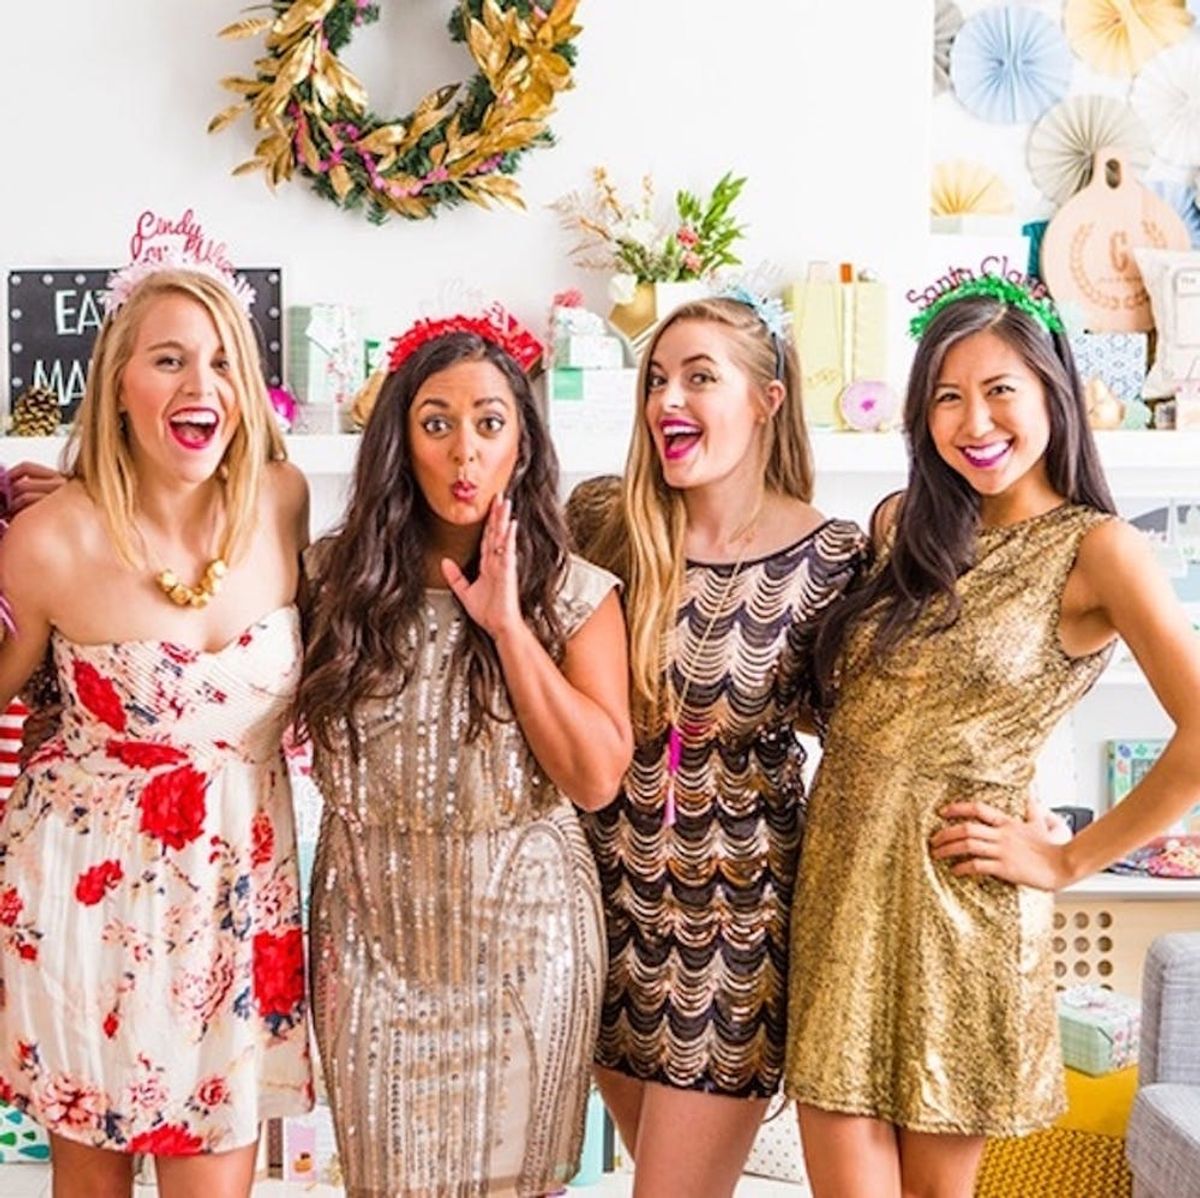 Share Your Ultimate Holiday Party Inspo and Win $500!